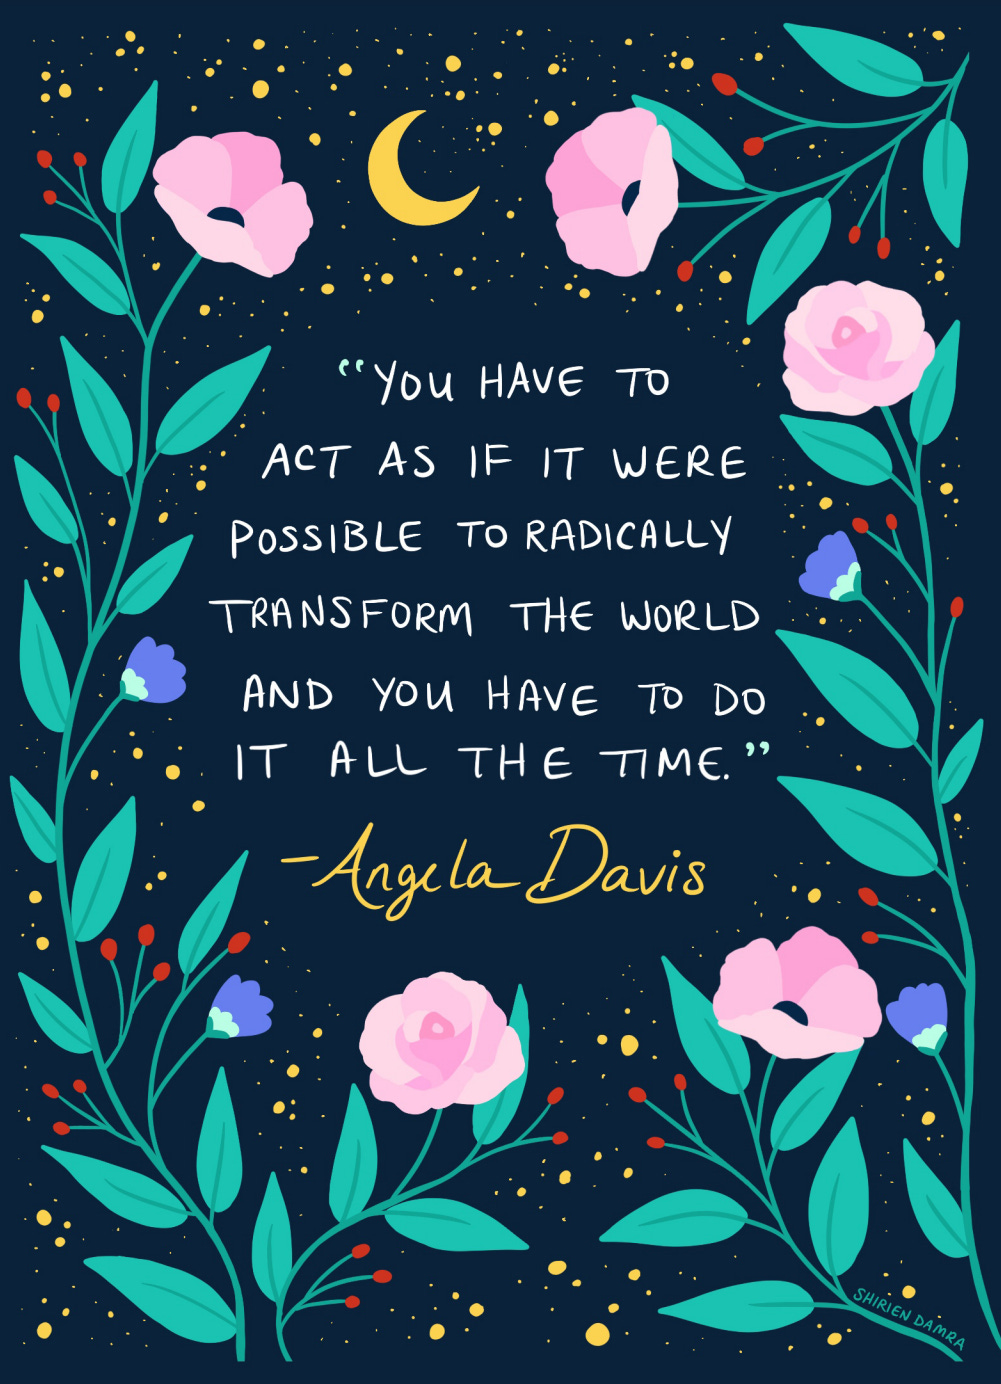 "You have to act as if it were possible to radically transform the world and you have to do it all the time." - Angela Davis